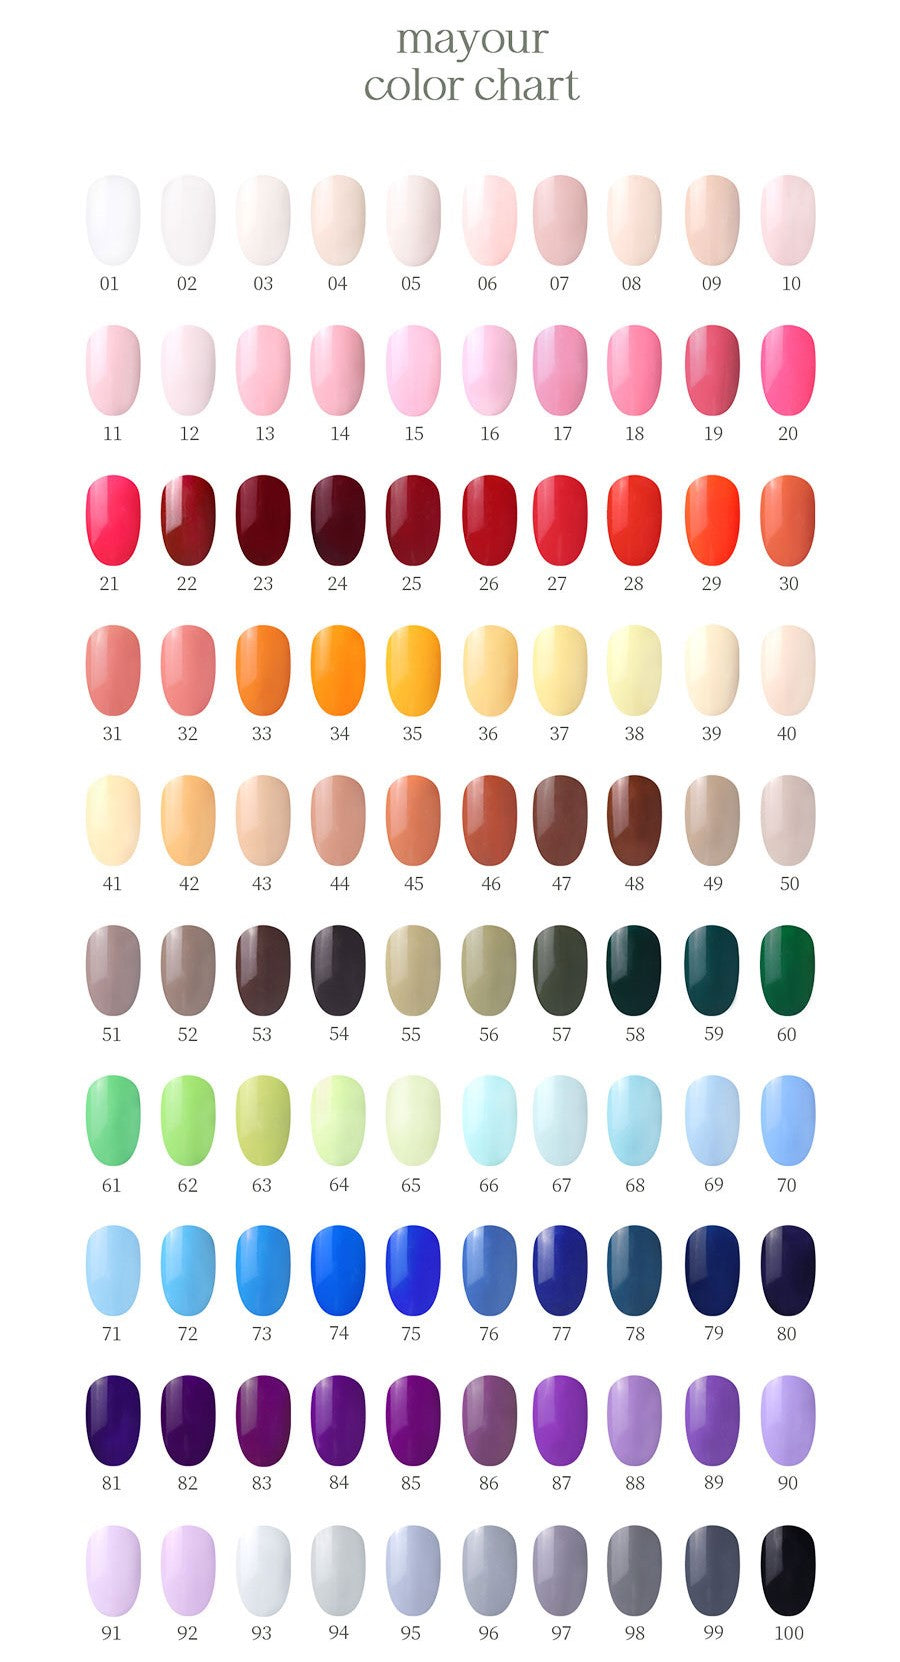 mayour color chart